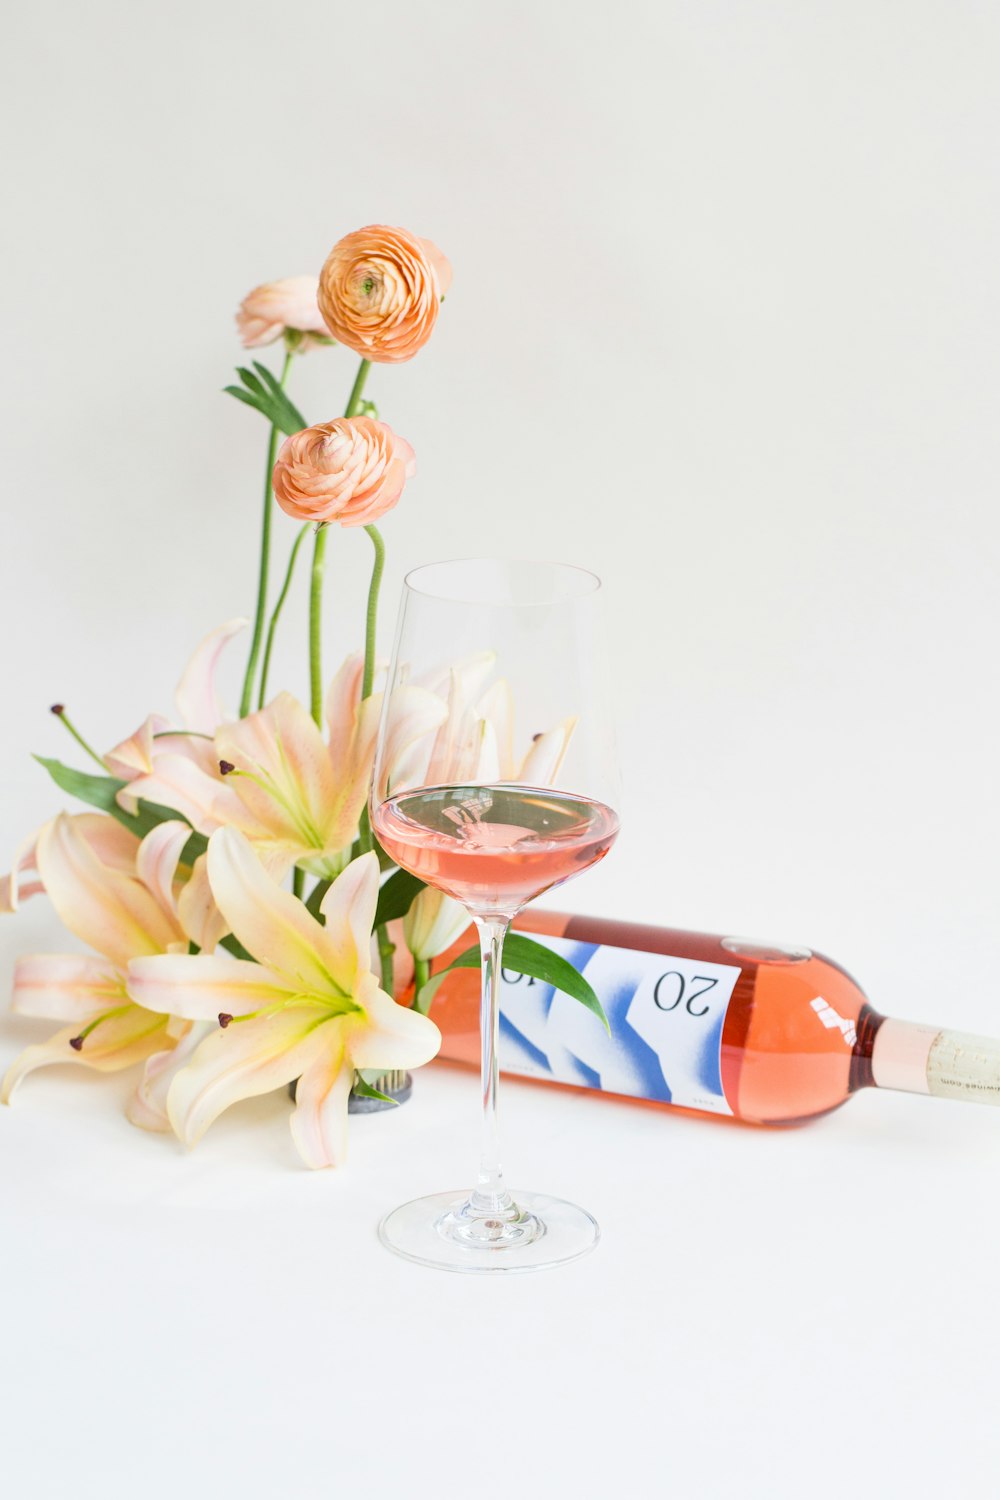 white flowers beside wine bottle and wine glass